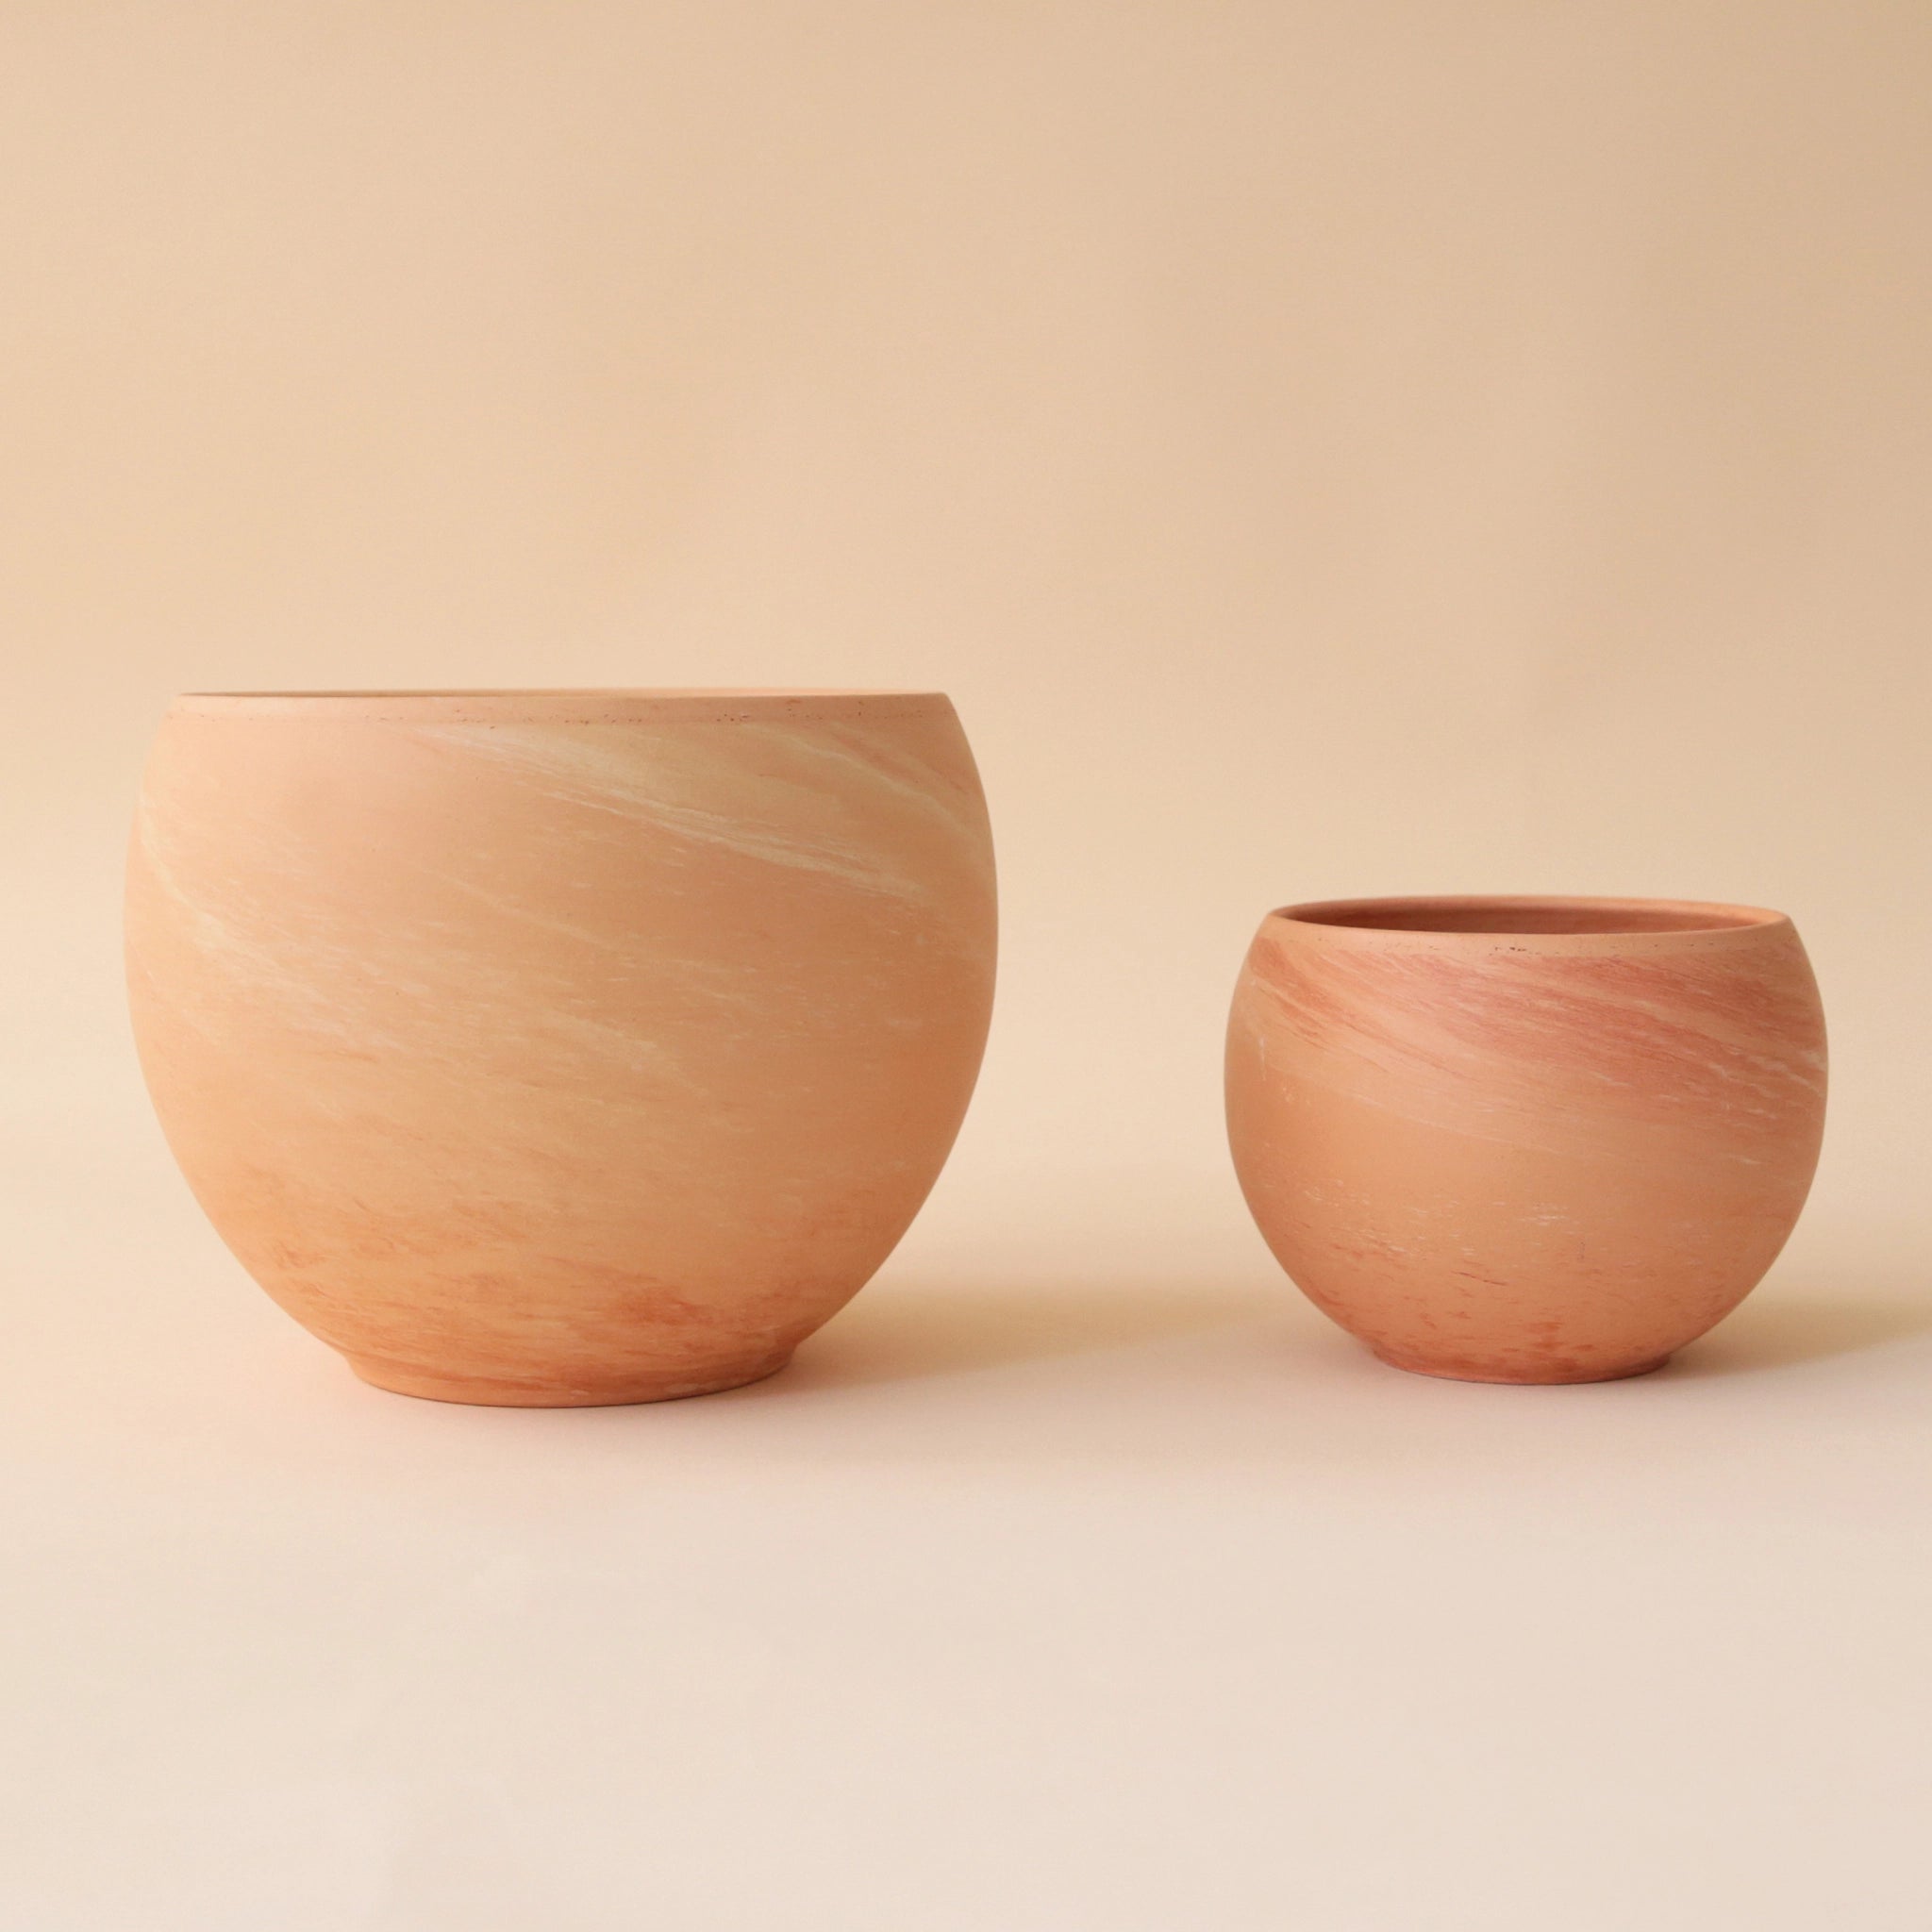 On a peach background is two round terracotta planters in two different sizes. 